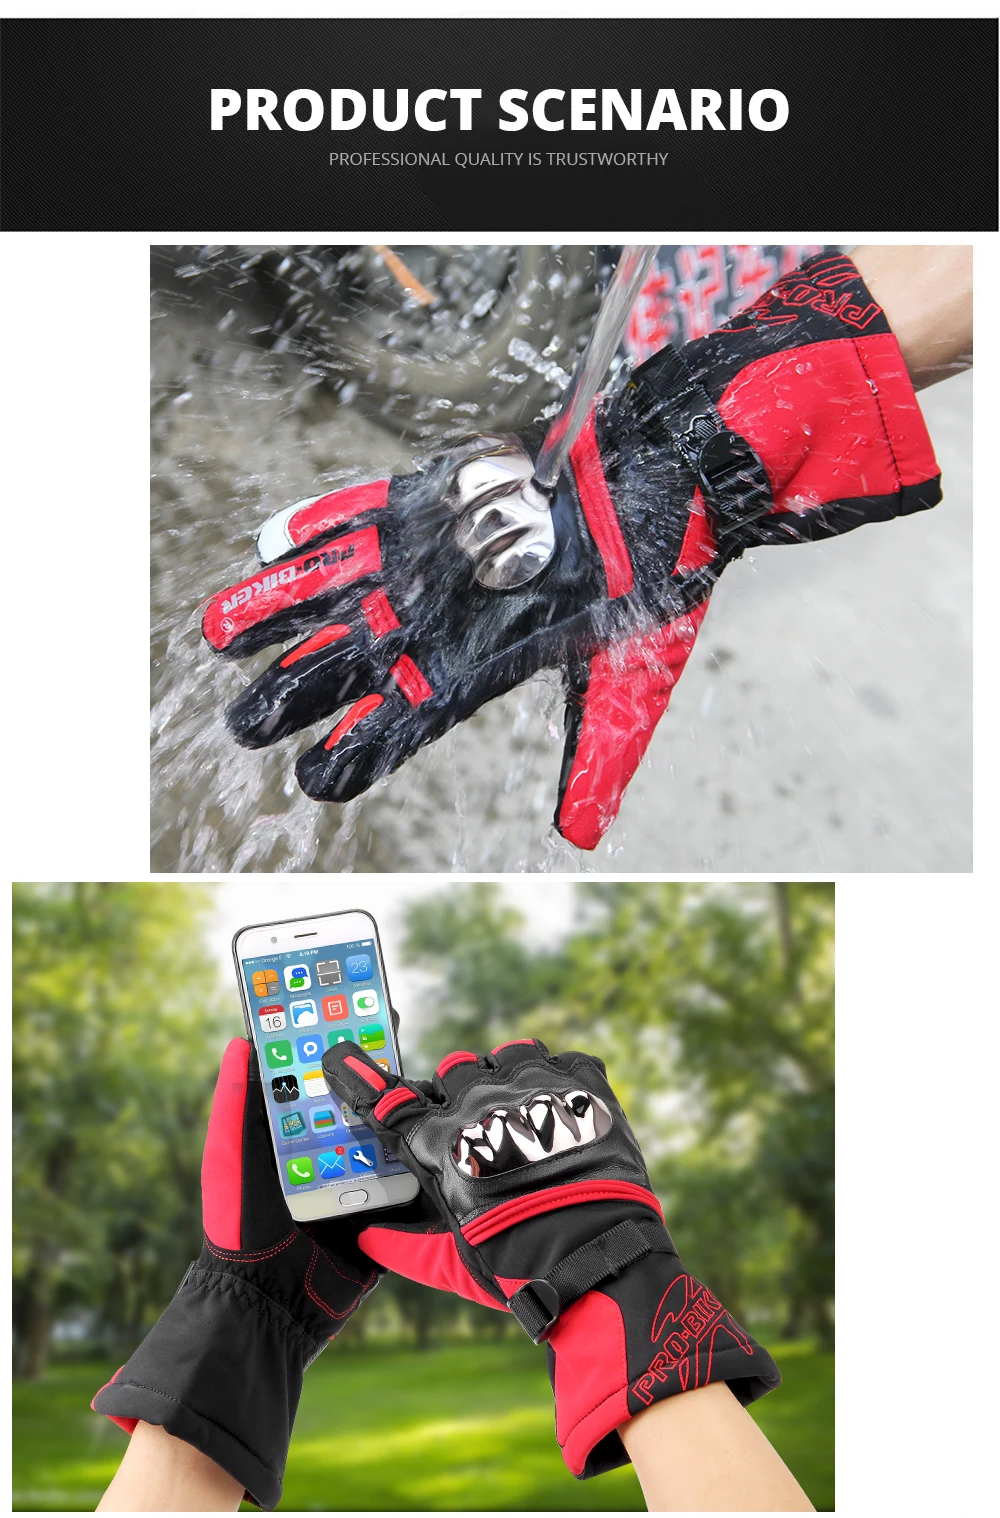 SUOMY Motorcycle Gloves Men Waterproof Windproof Winter Guantes Moto Gloves Touch Screen Motorbike Riding Gloves